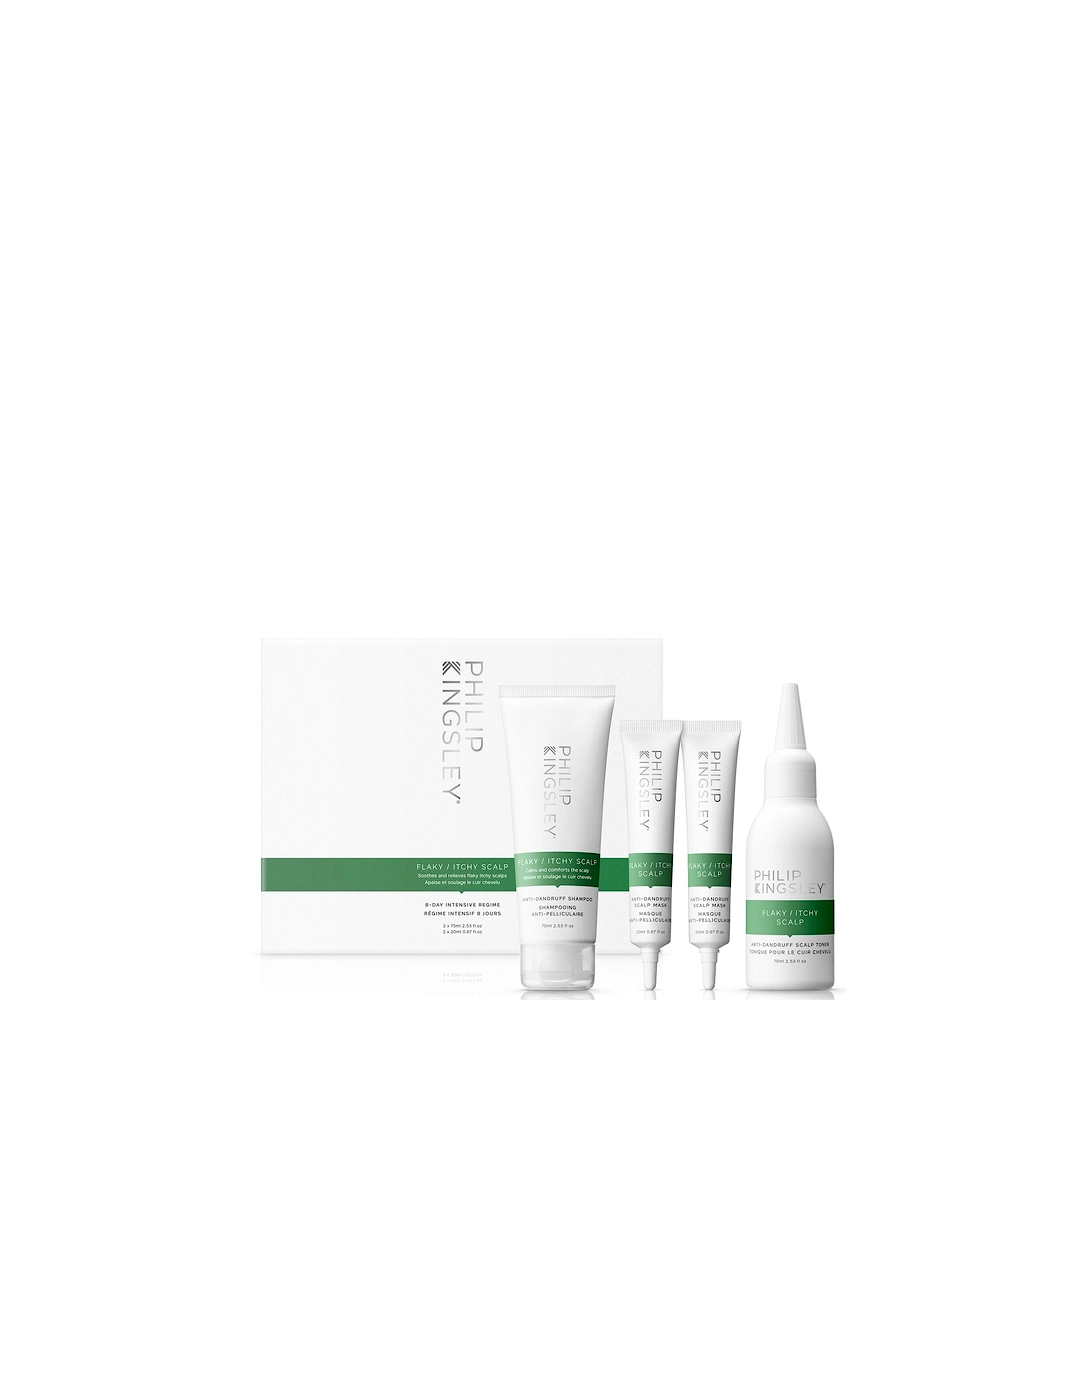 Flaky/Itchy Scalp 8-Day Kit (Worth £44) - Philip Kingsley, 2 of 1